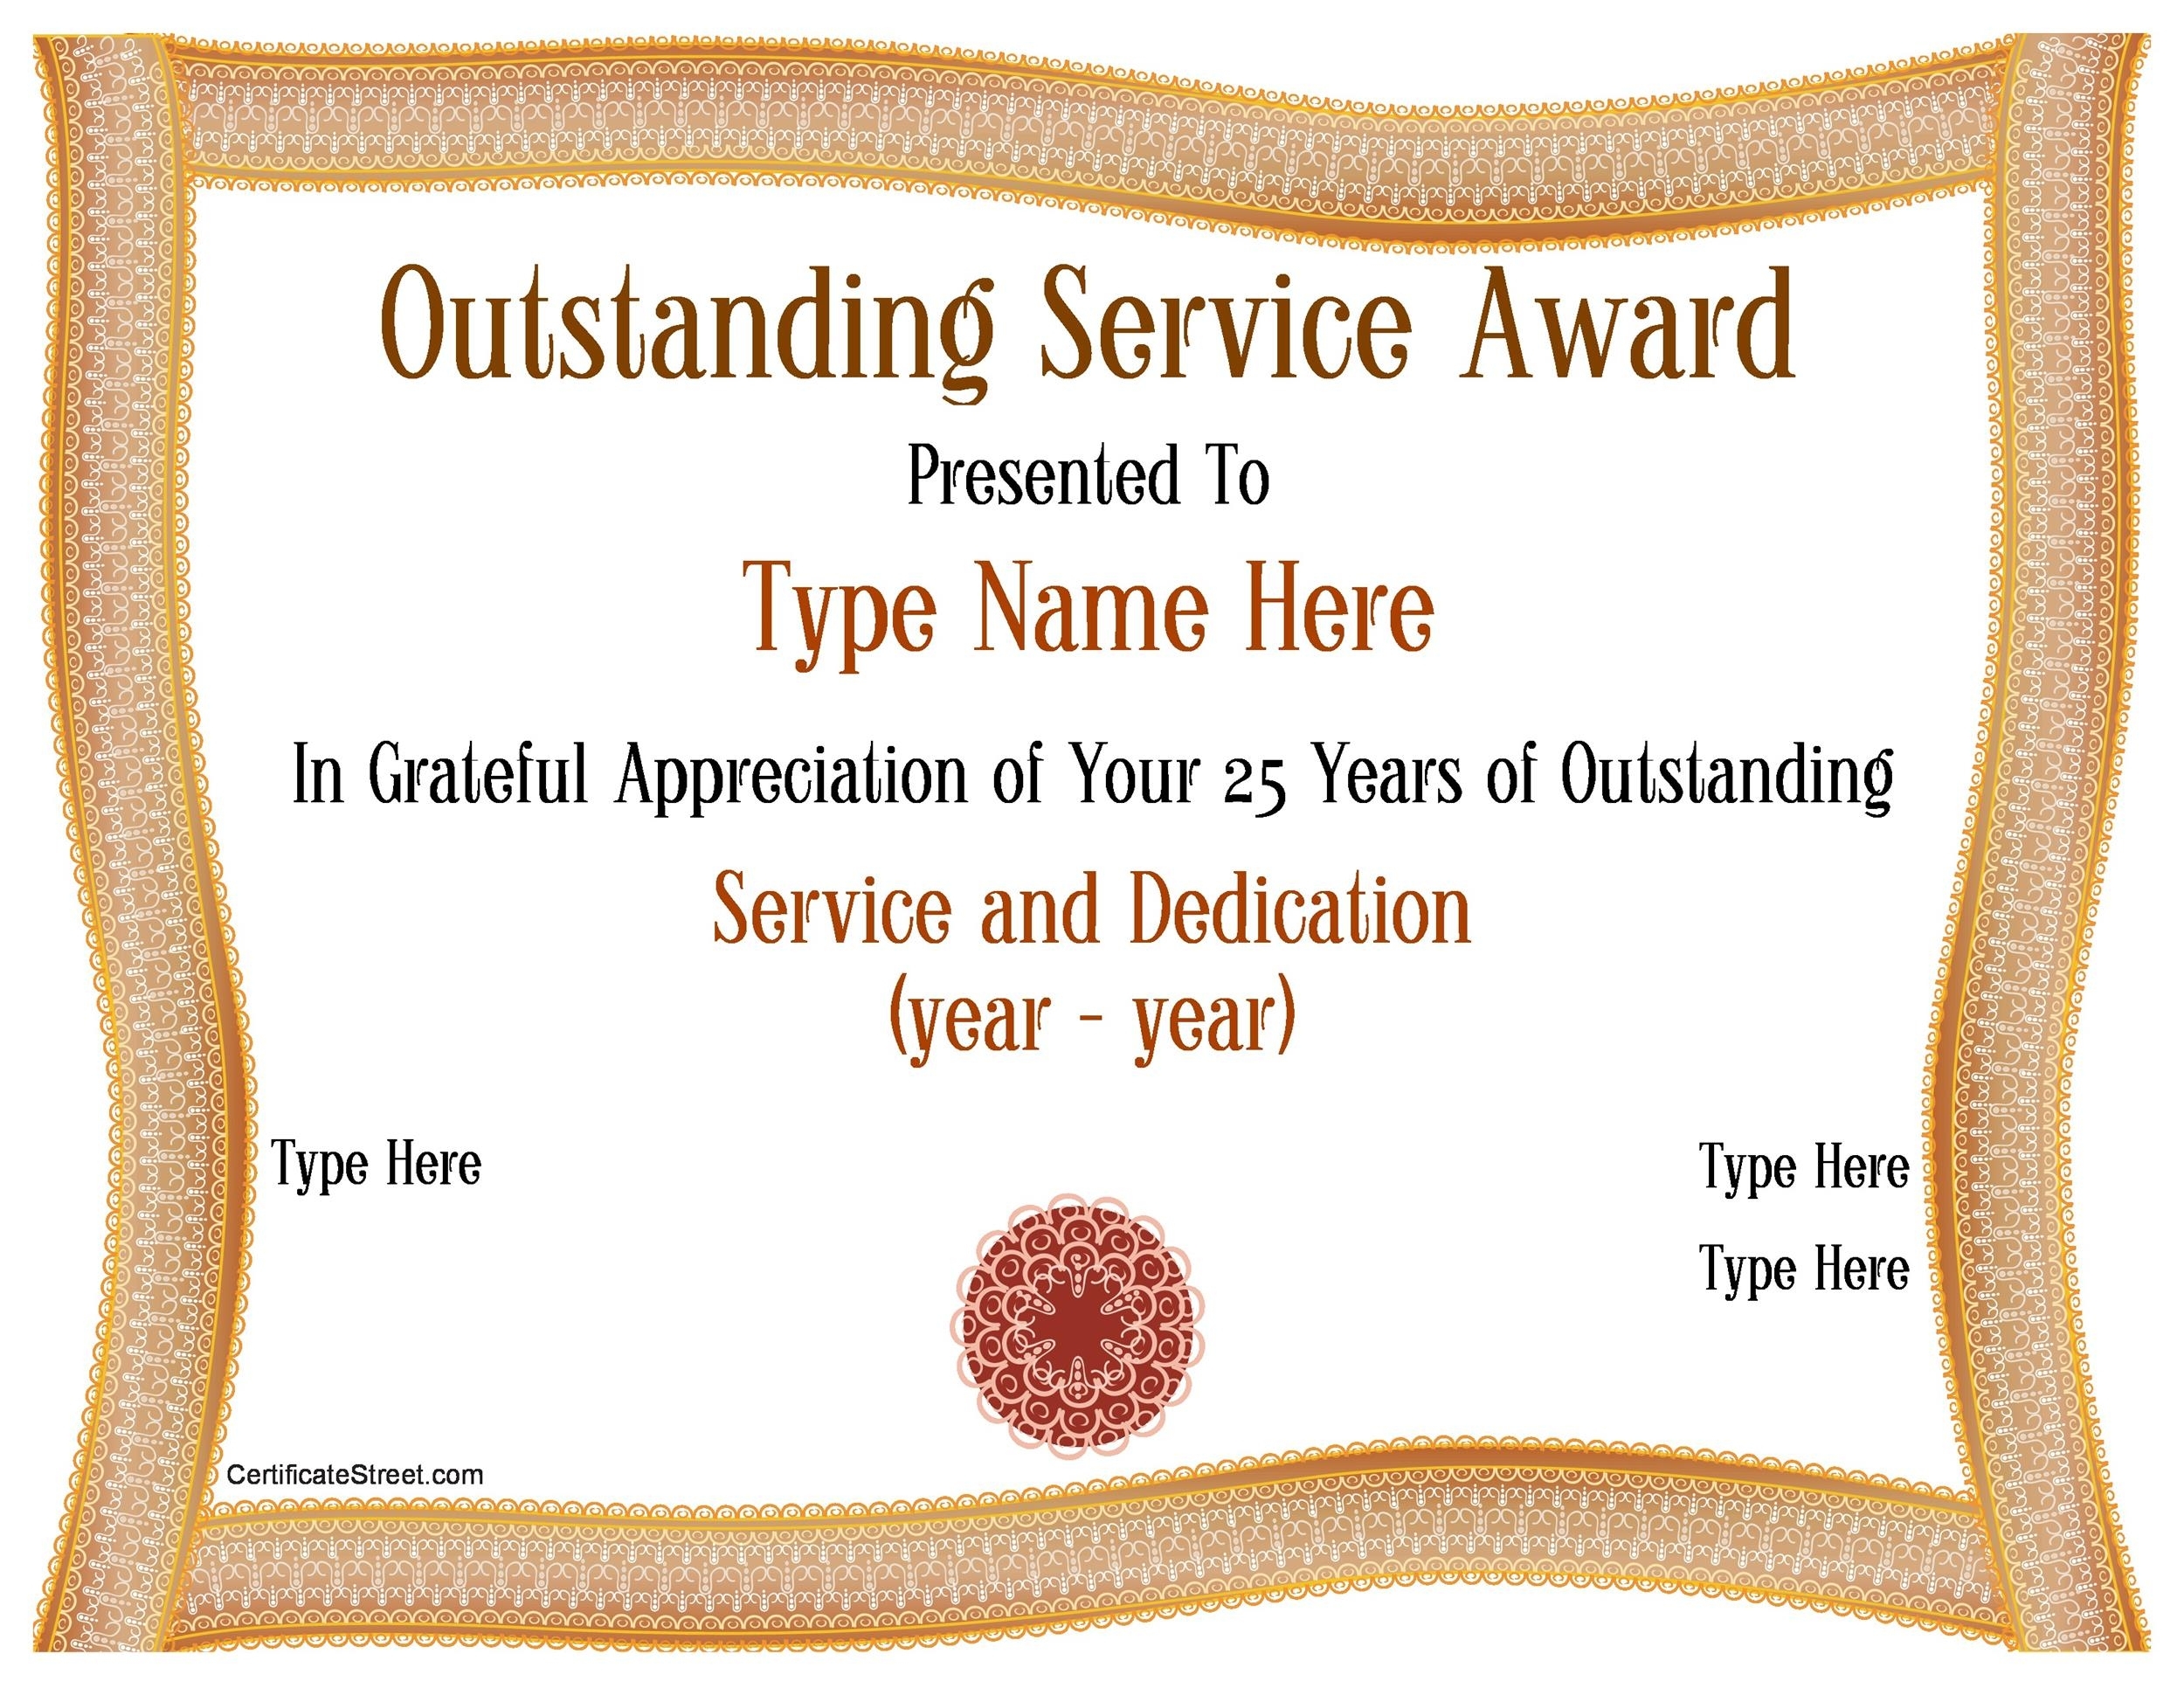 Certificate Of Years Of Service Template - Printable Word Doc 5 Year Regarding Employee Certificate Of Service Template